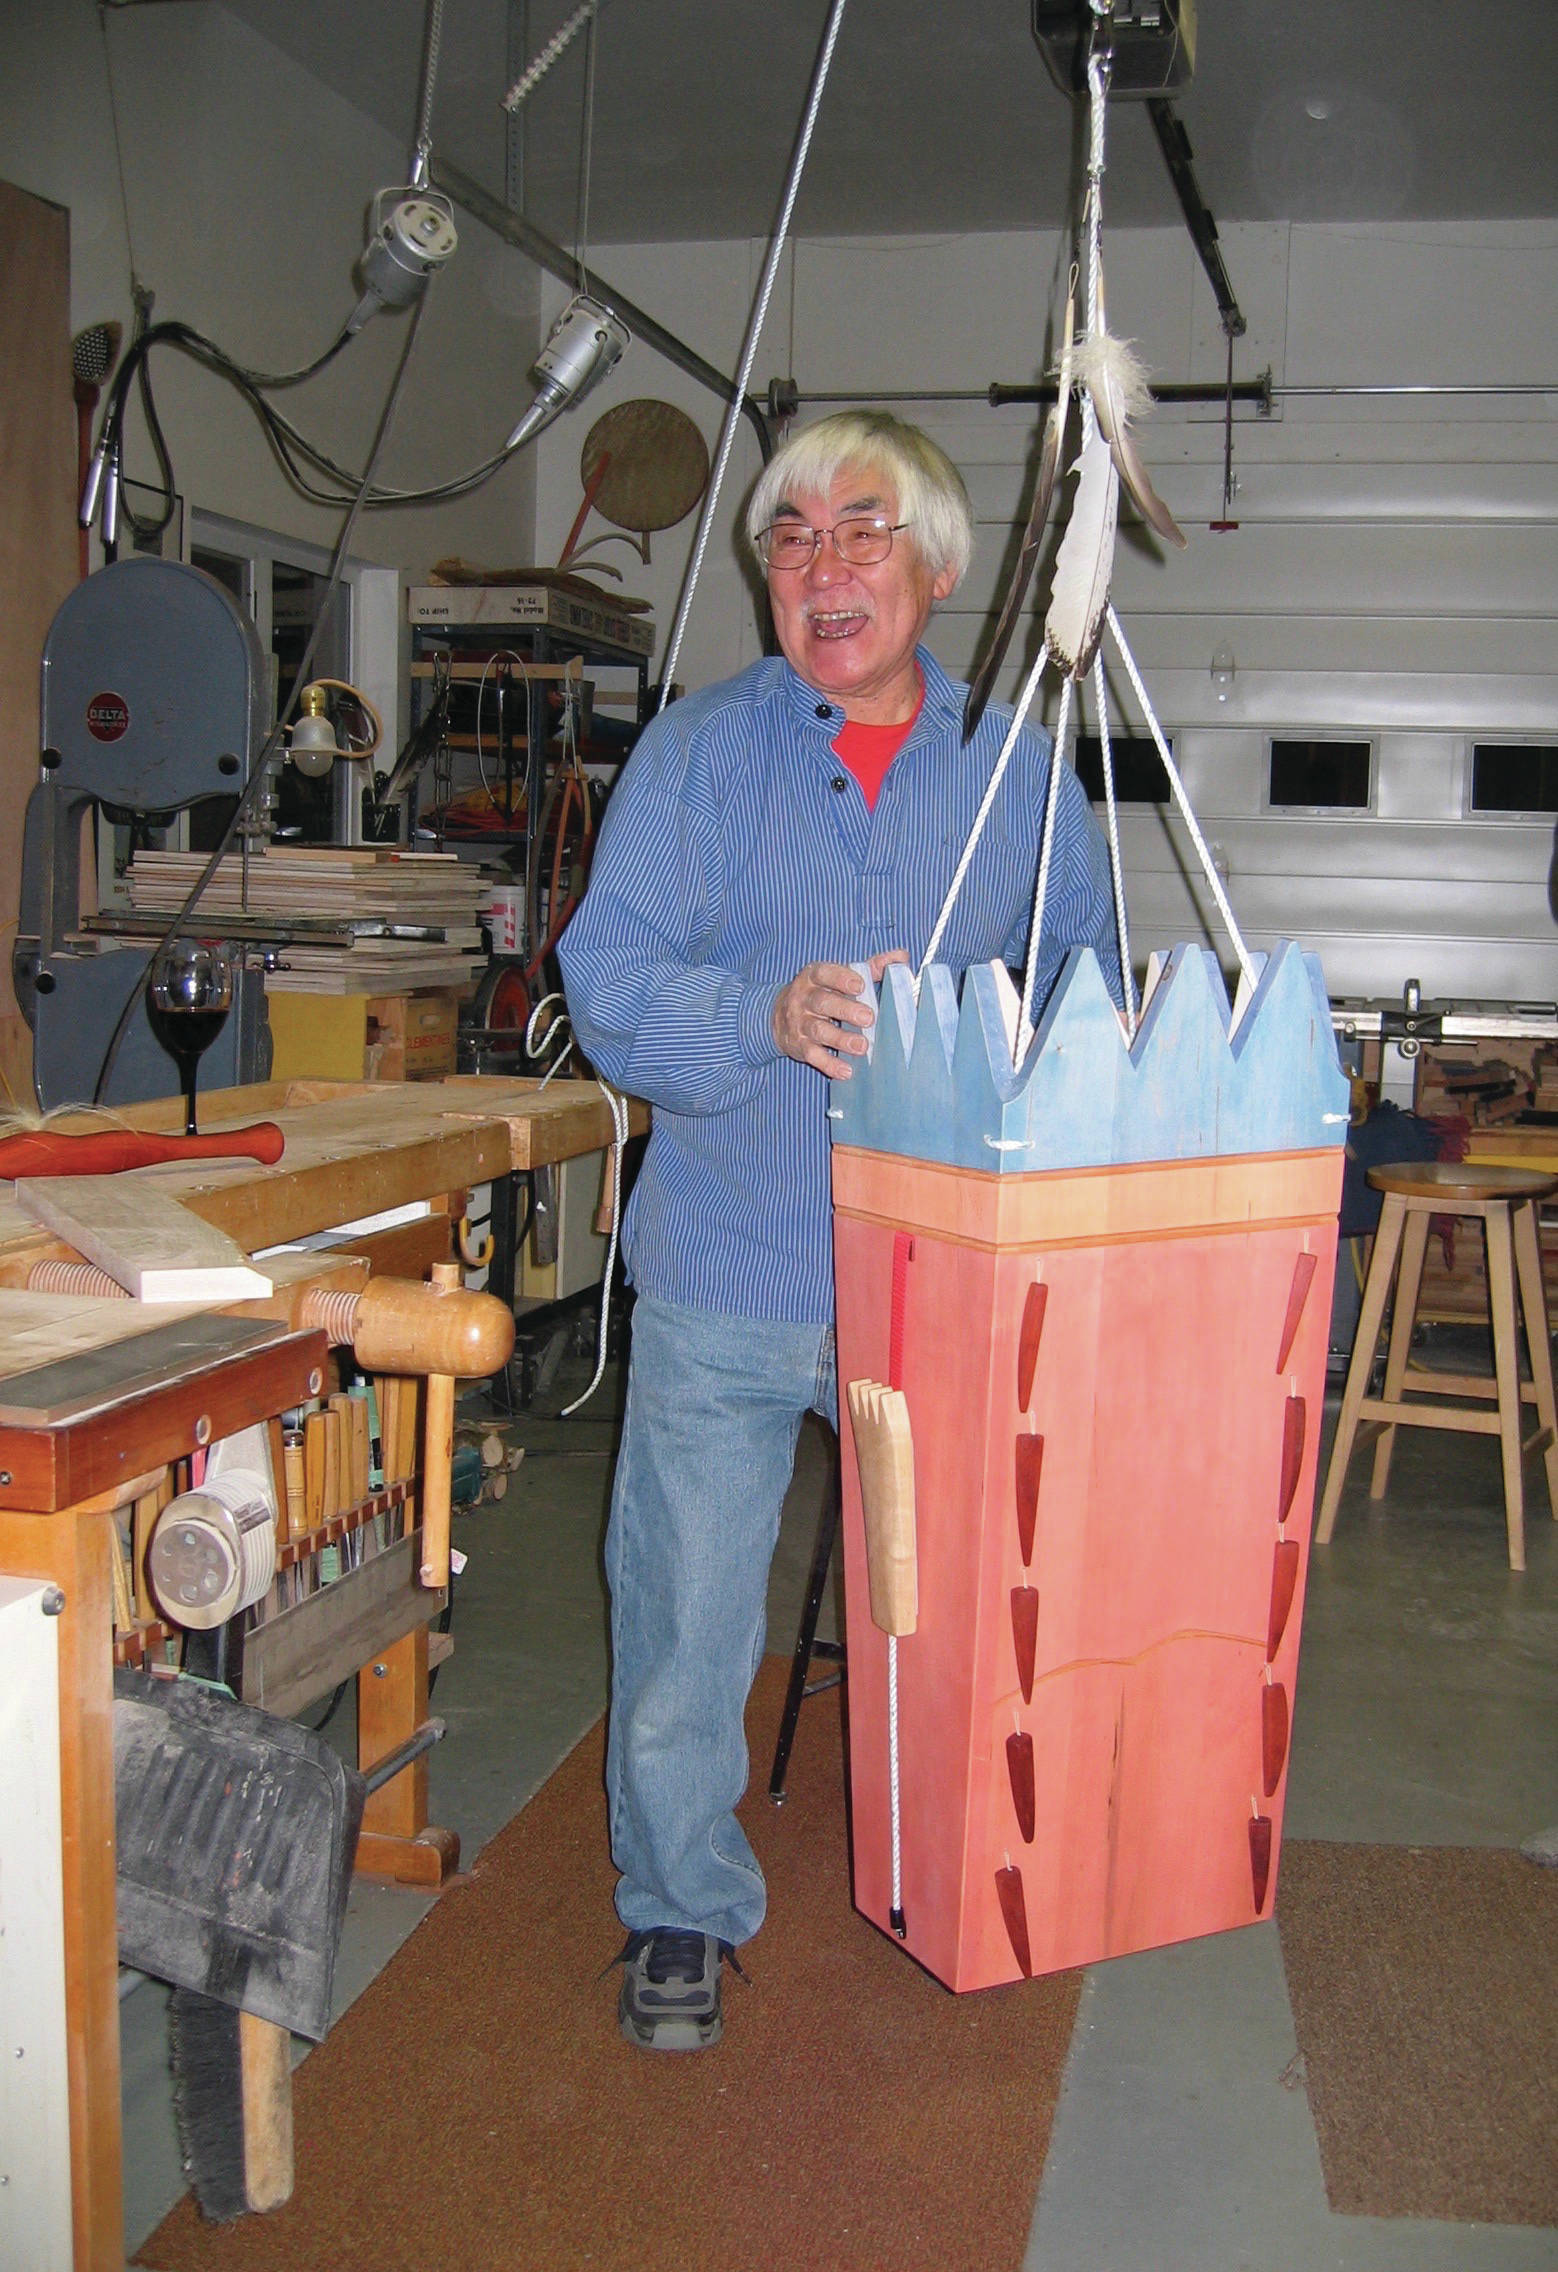 Ron Senungetuk poses with a drum he made on Jan. 14, 2005, in Homer, Alaska. (Photo courtesy of Rika Mouw)